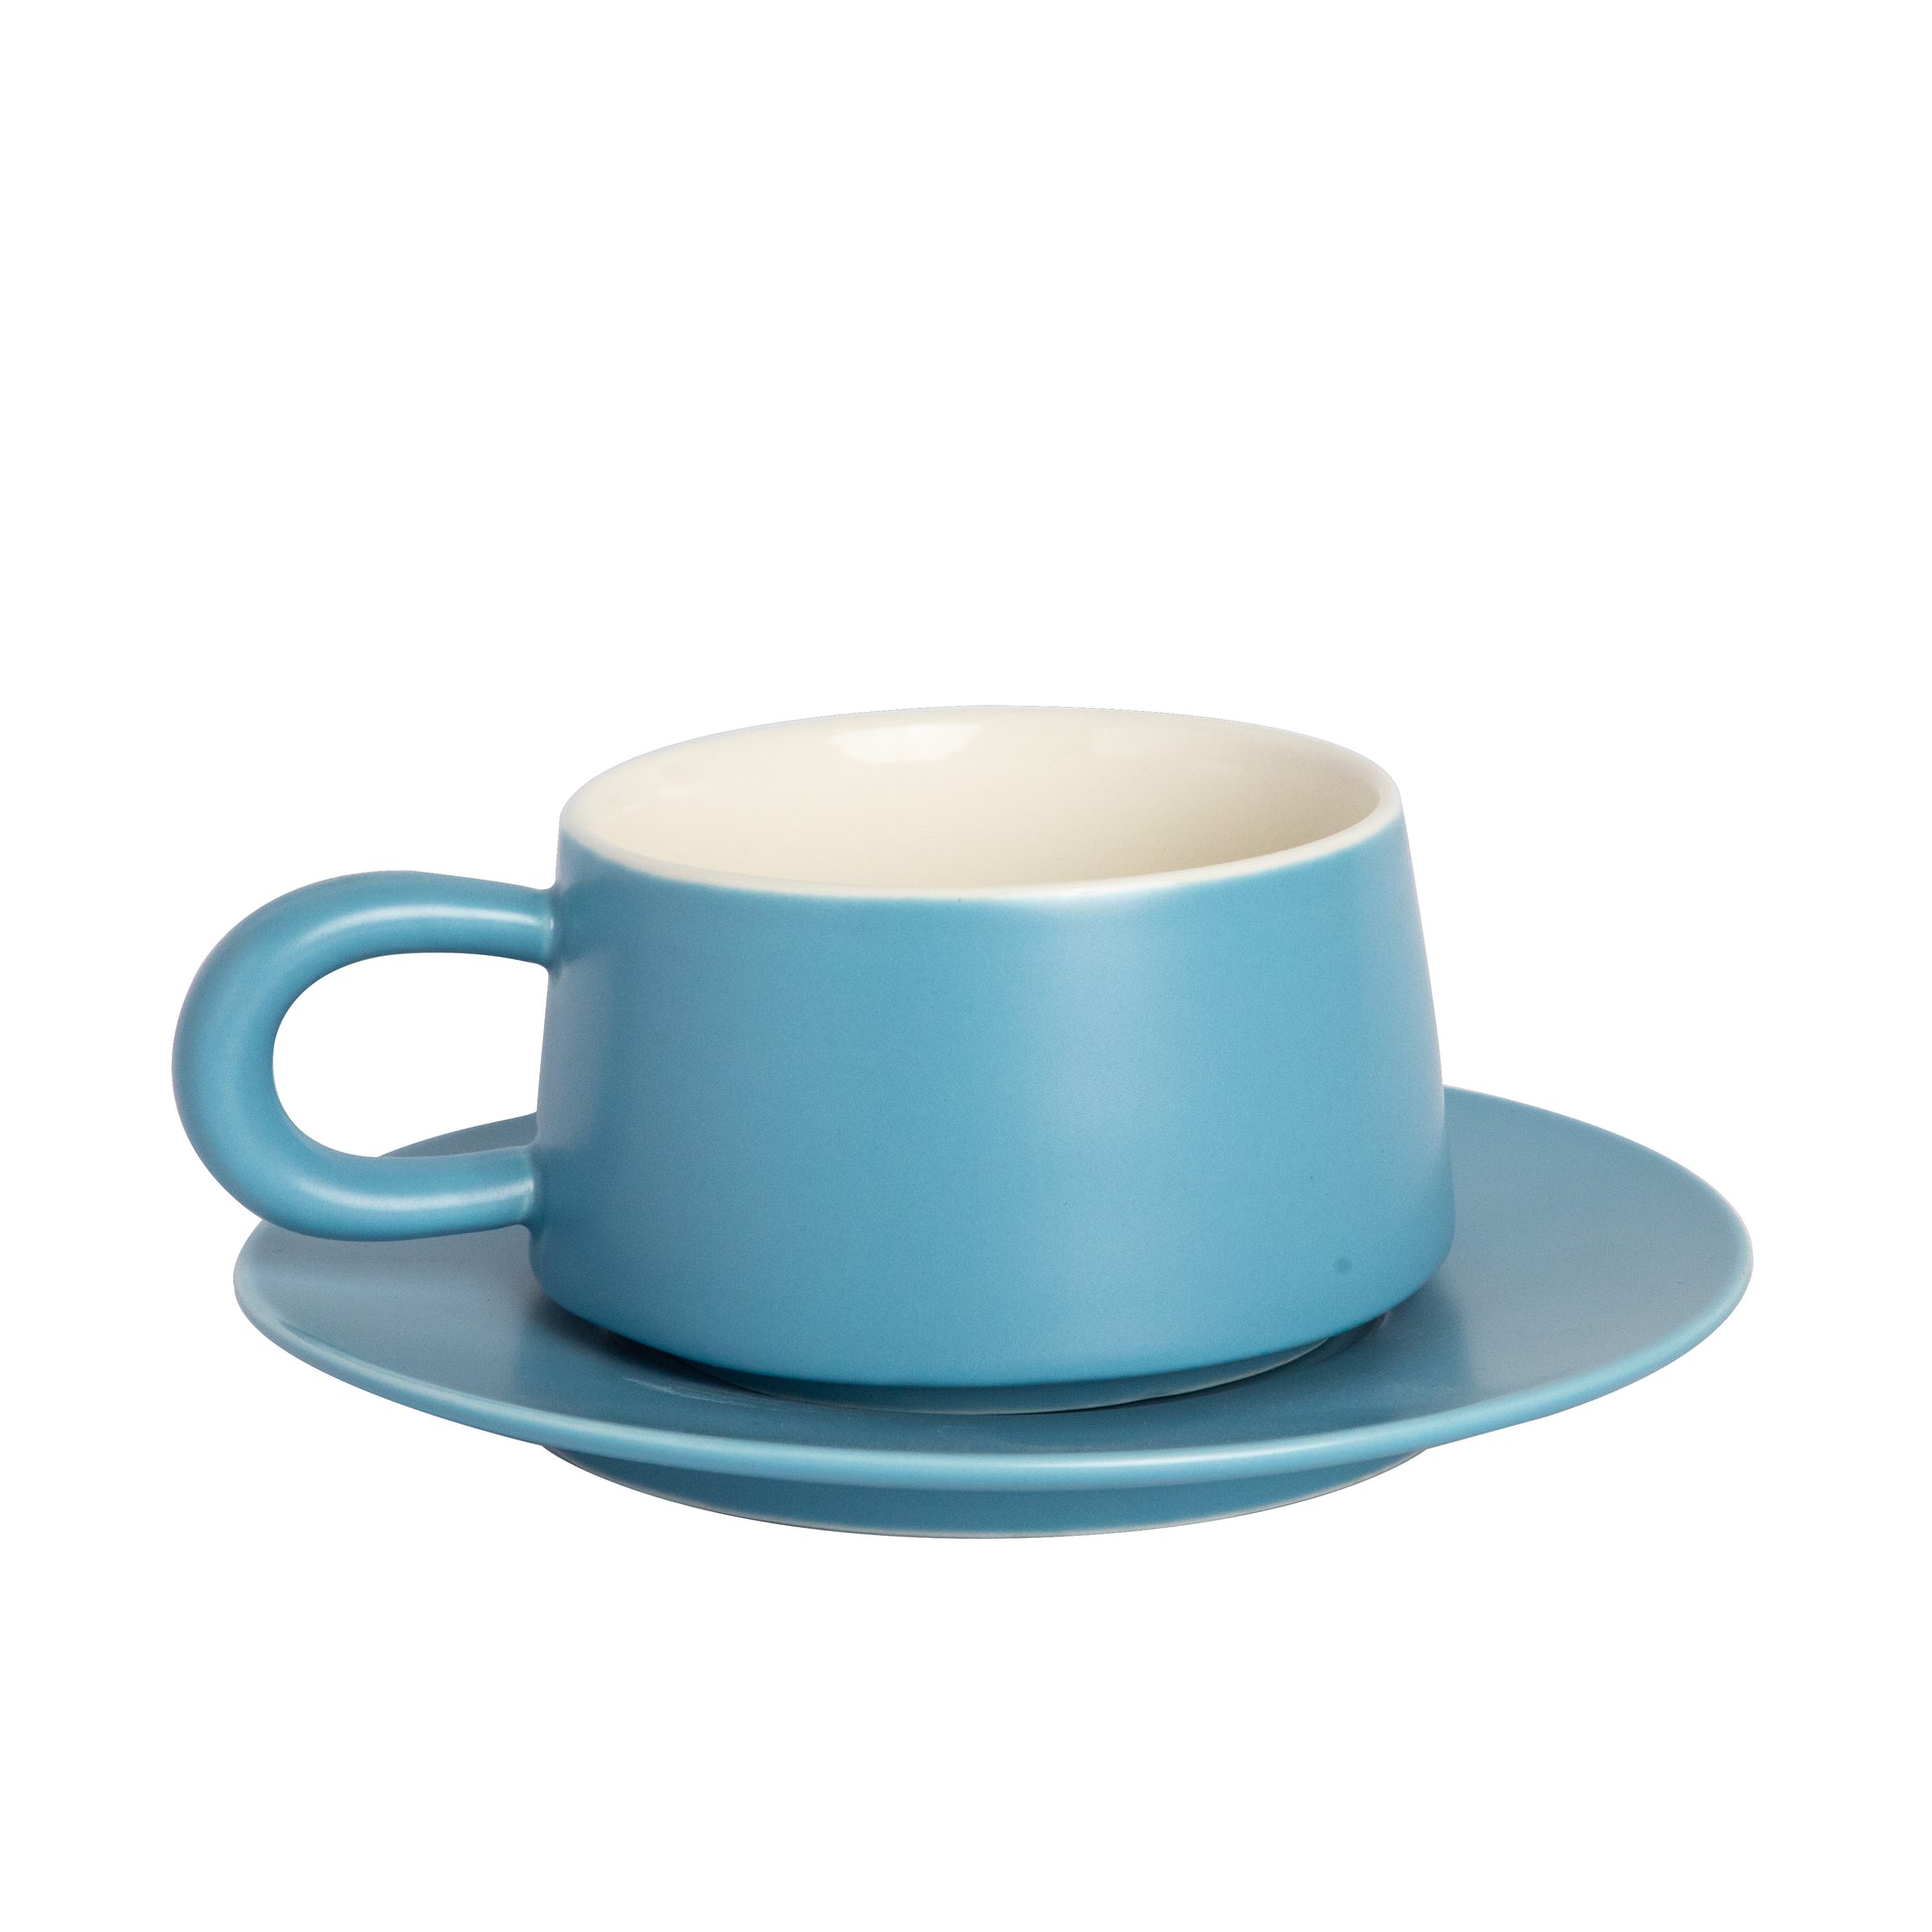 Ceramic cup/mug with saucer for your favorite beverages - stylish and functional.